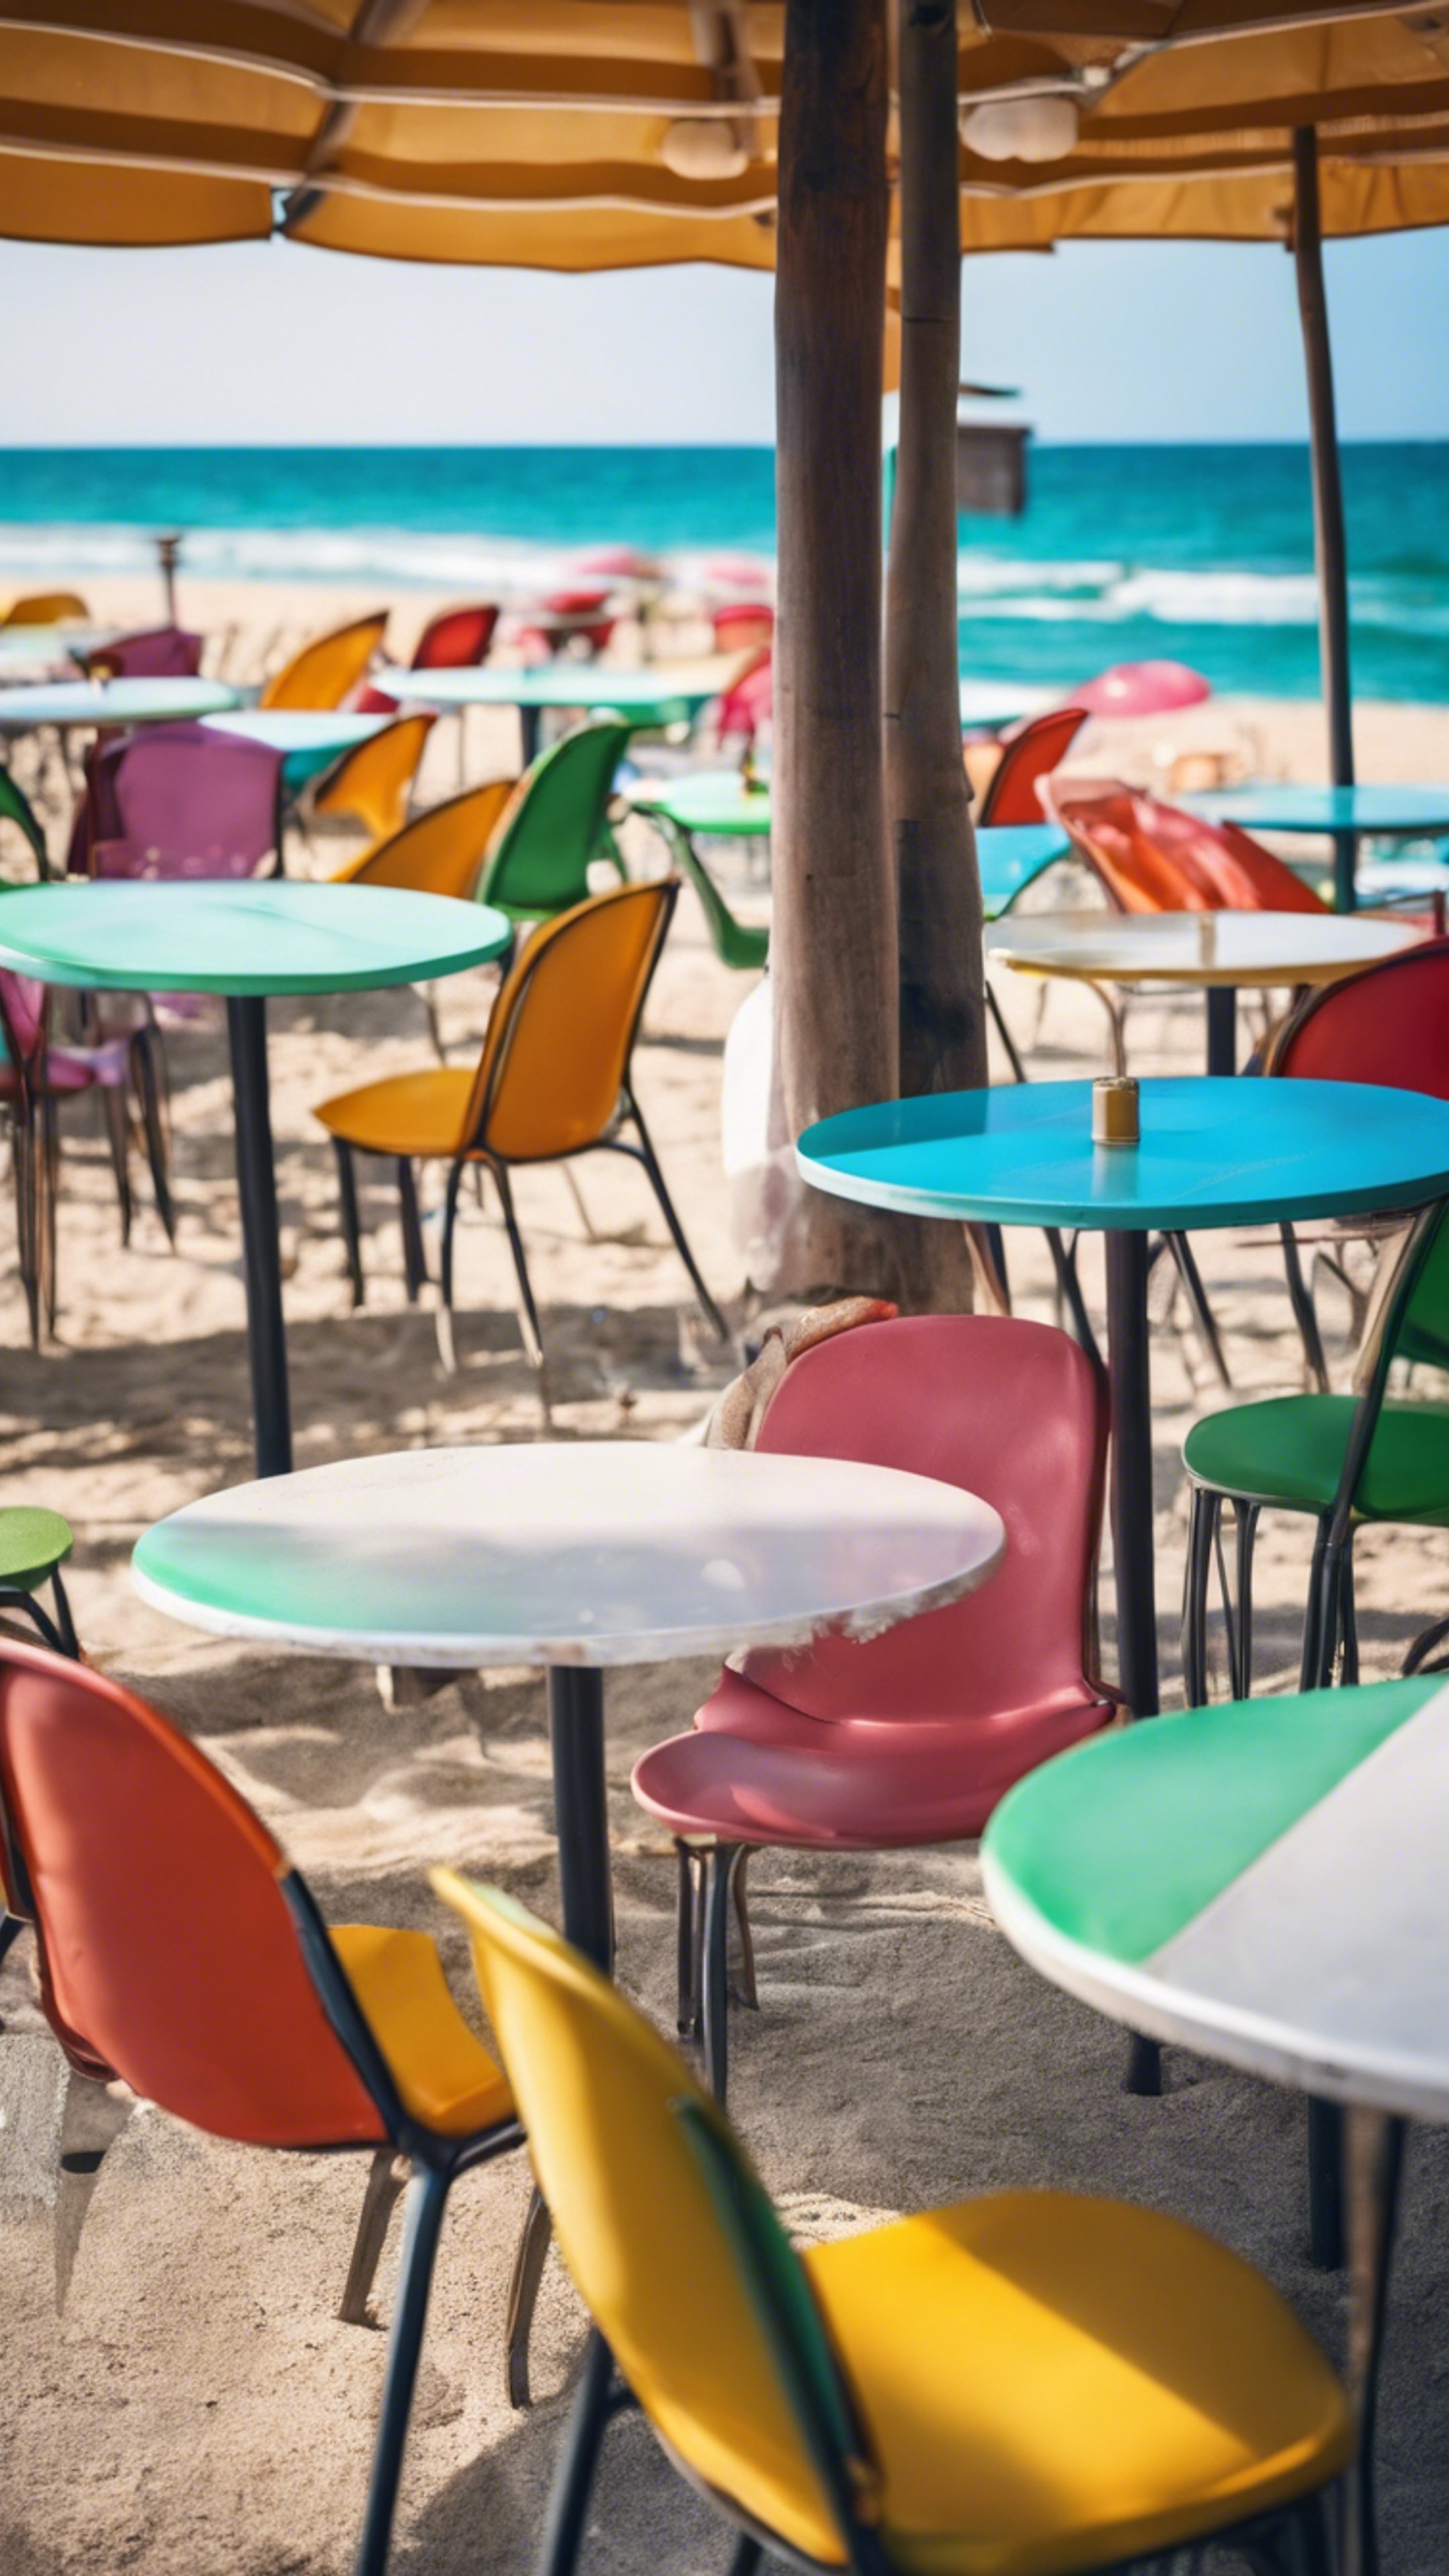 A beach side cafe with colorful chairs, umbrellas, and a panoramic view of the ocean. 墙纸[e8a344cbd52d49a3867e]